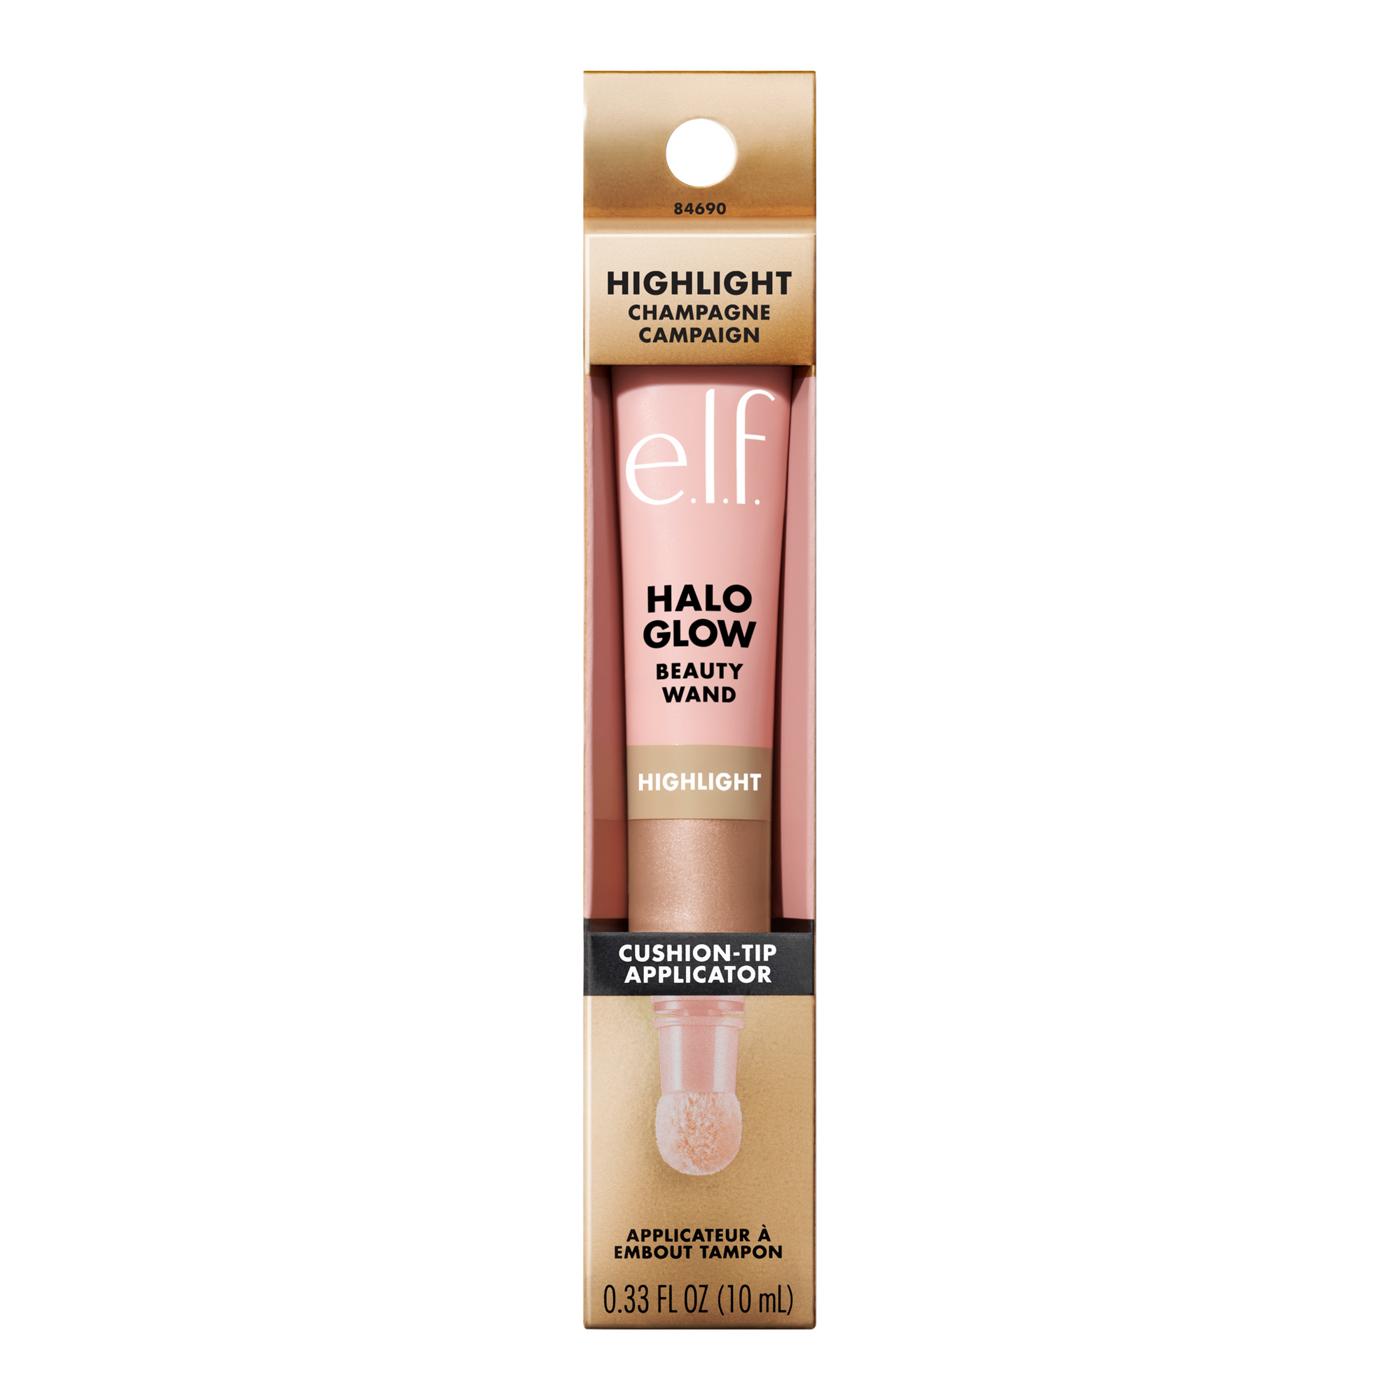 e.l.f. Halo Glow Beauty Wand Highlight - Champagne Campaign; image 1 of 2